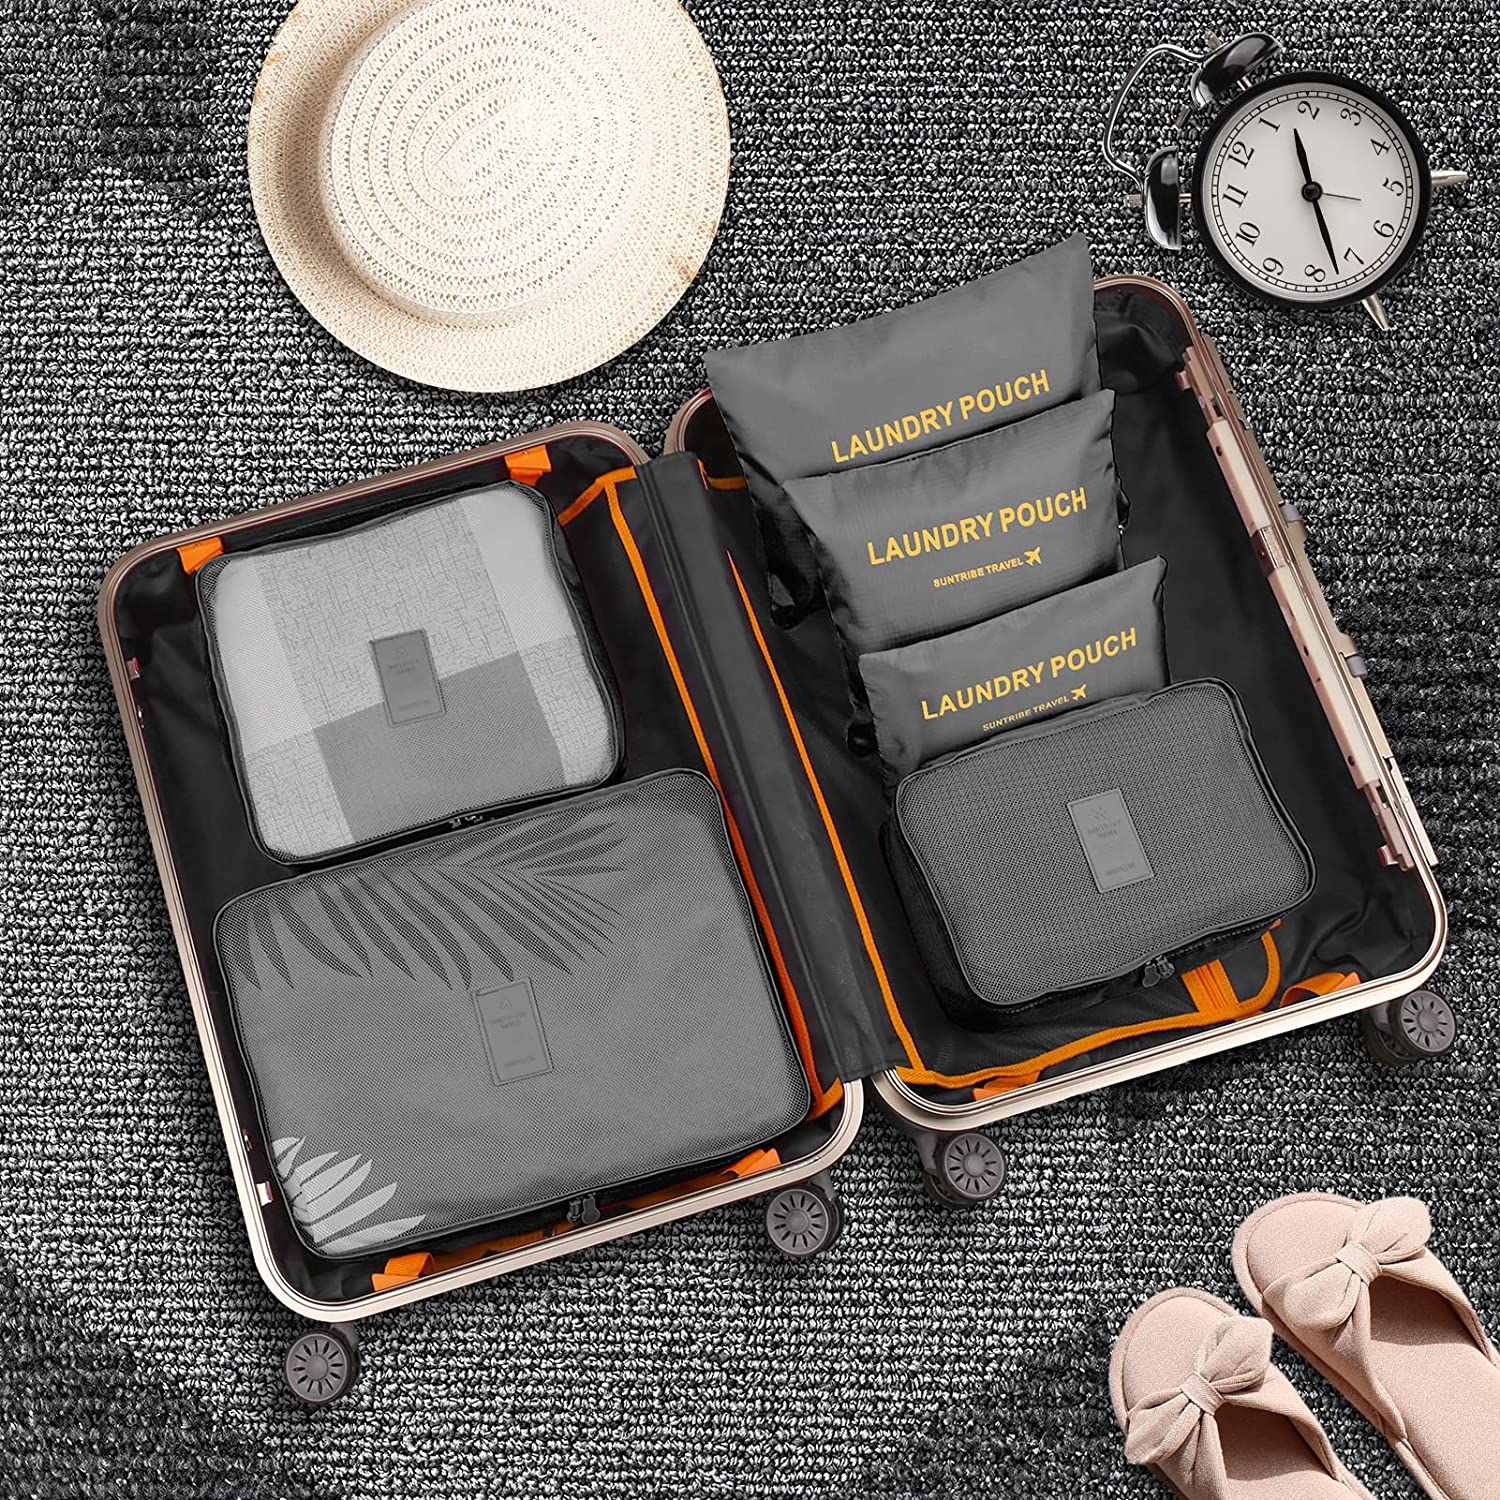 GumTape Travel Organiser Packing Bags,6 PCS Travel Packing Cubes Set for Clothes Travel Luggage Organizers Storage Bags - FoxMart™️ - FoxMart™️